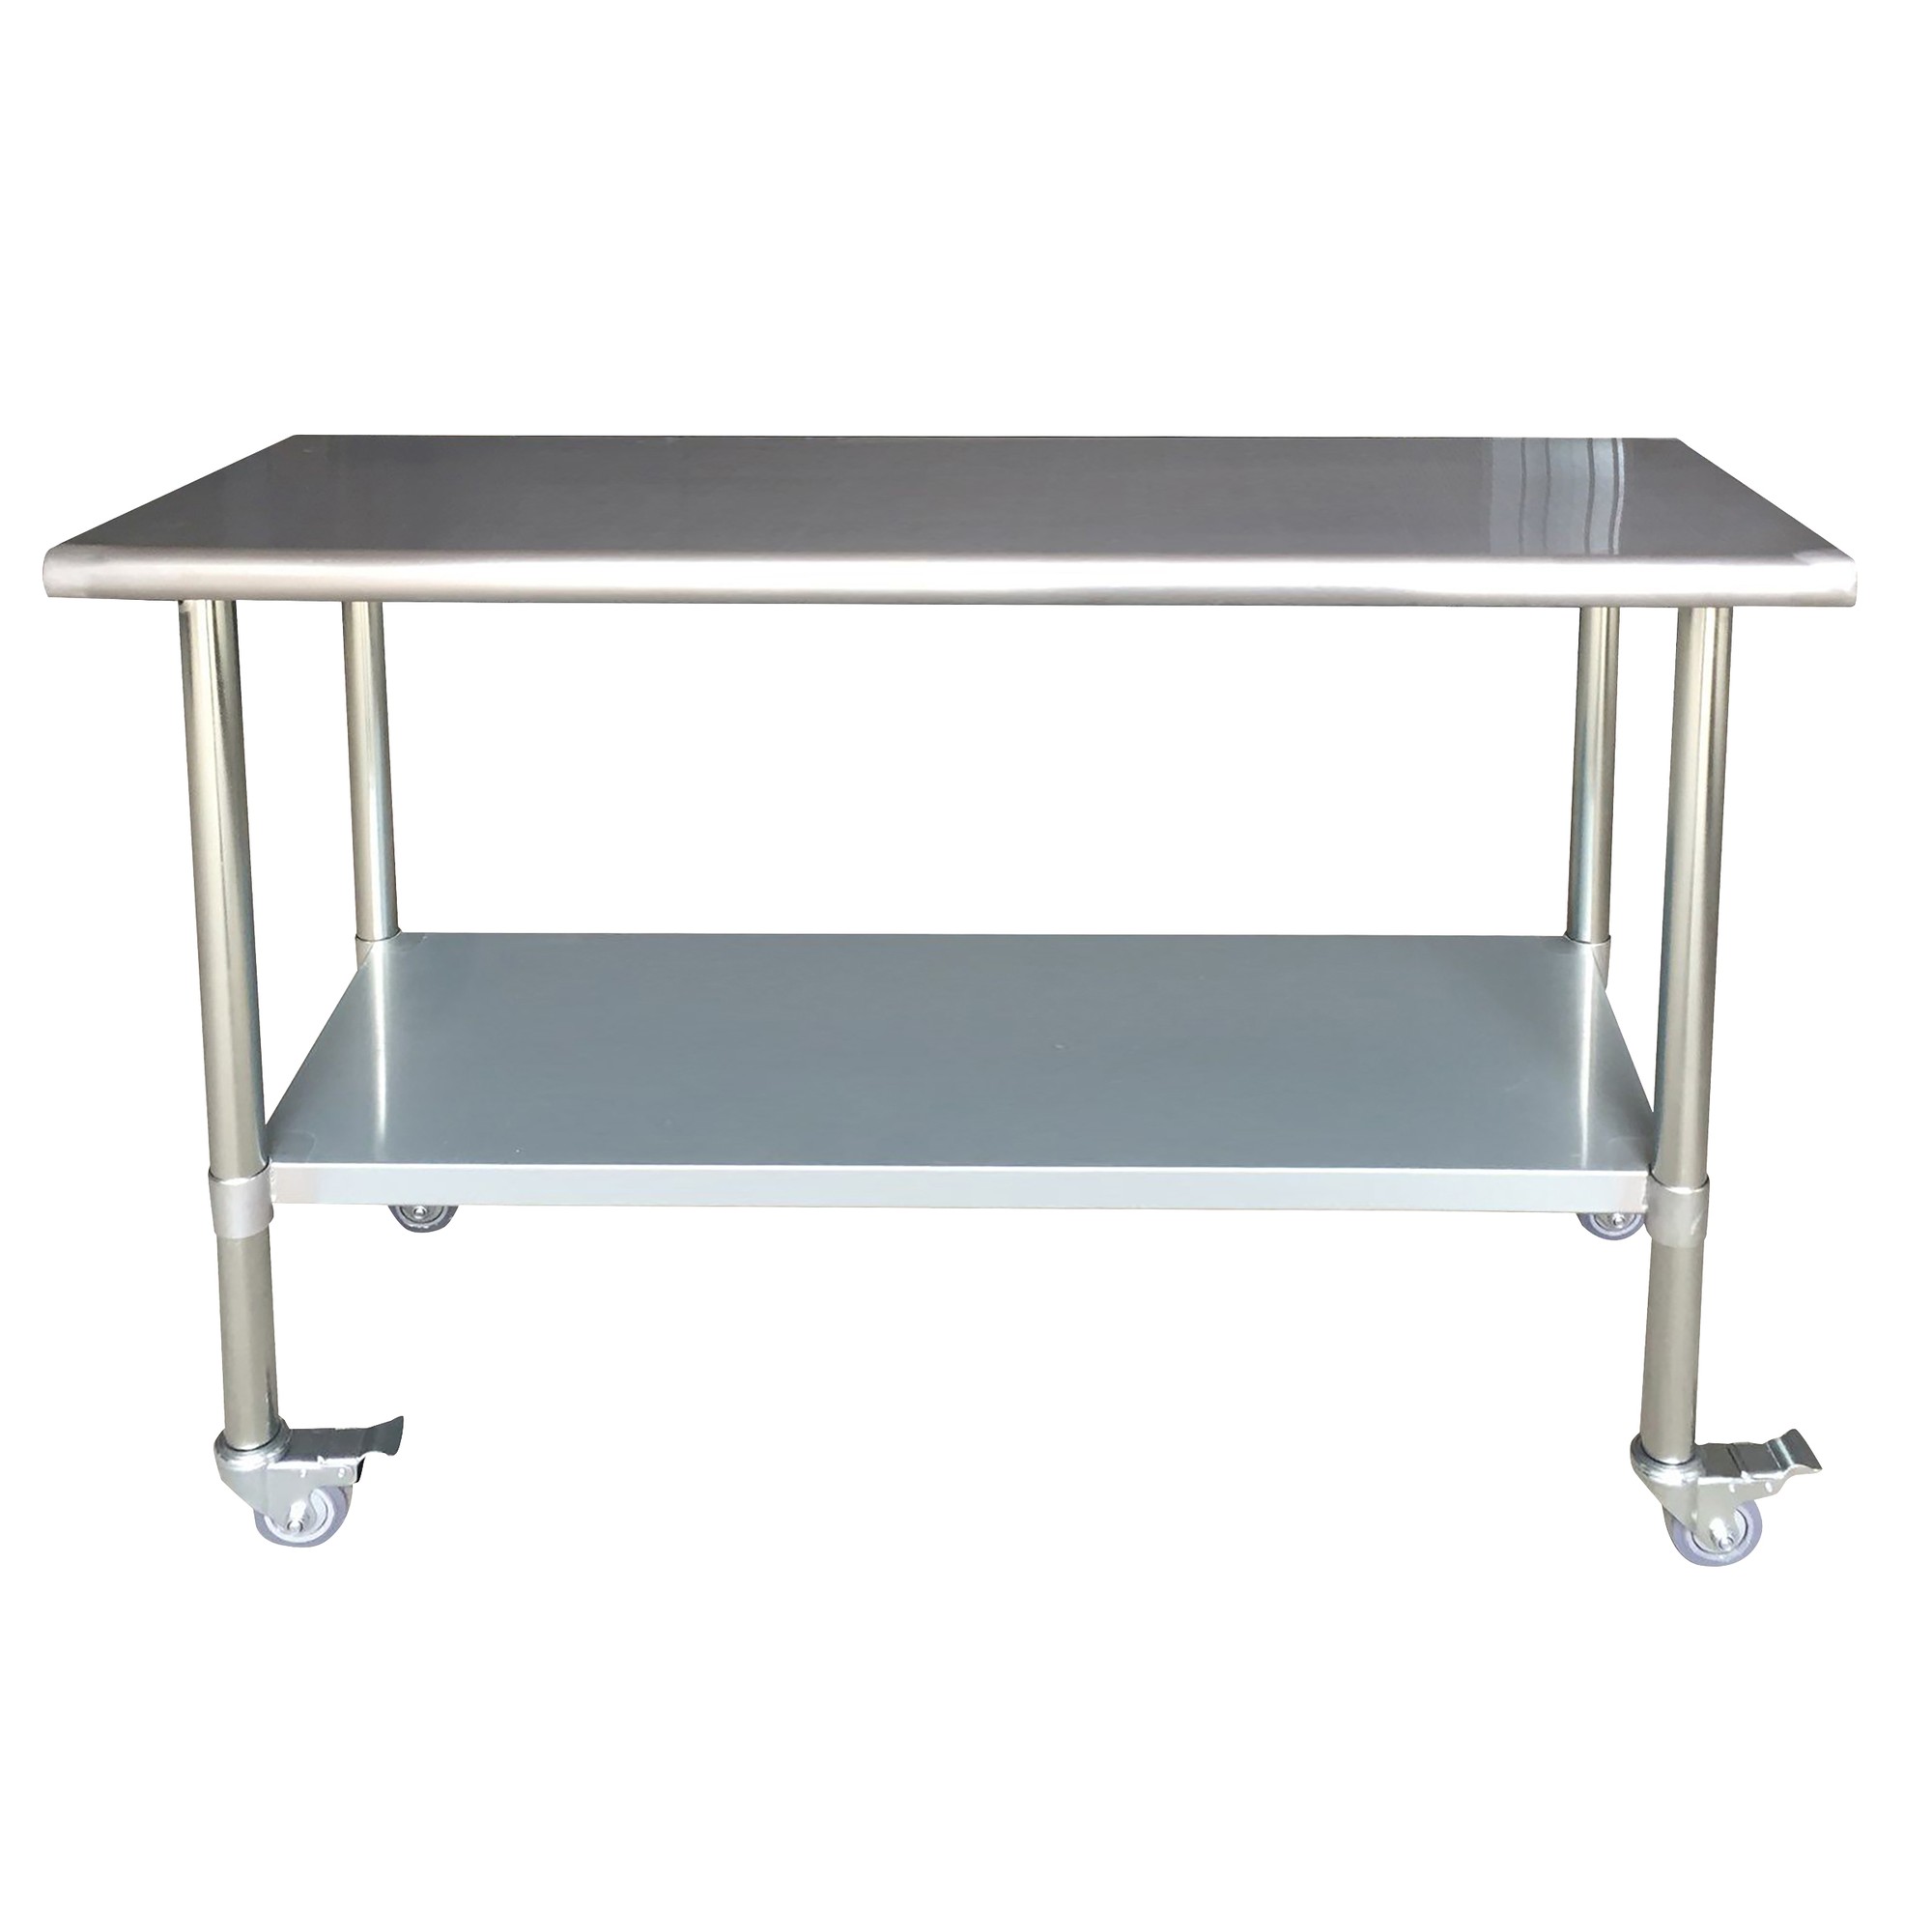 Stainless Steel Work Table with Casters 24 x 60 Inches